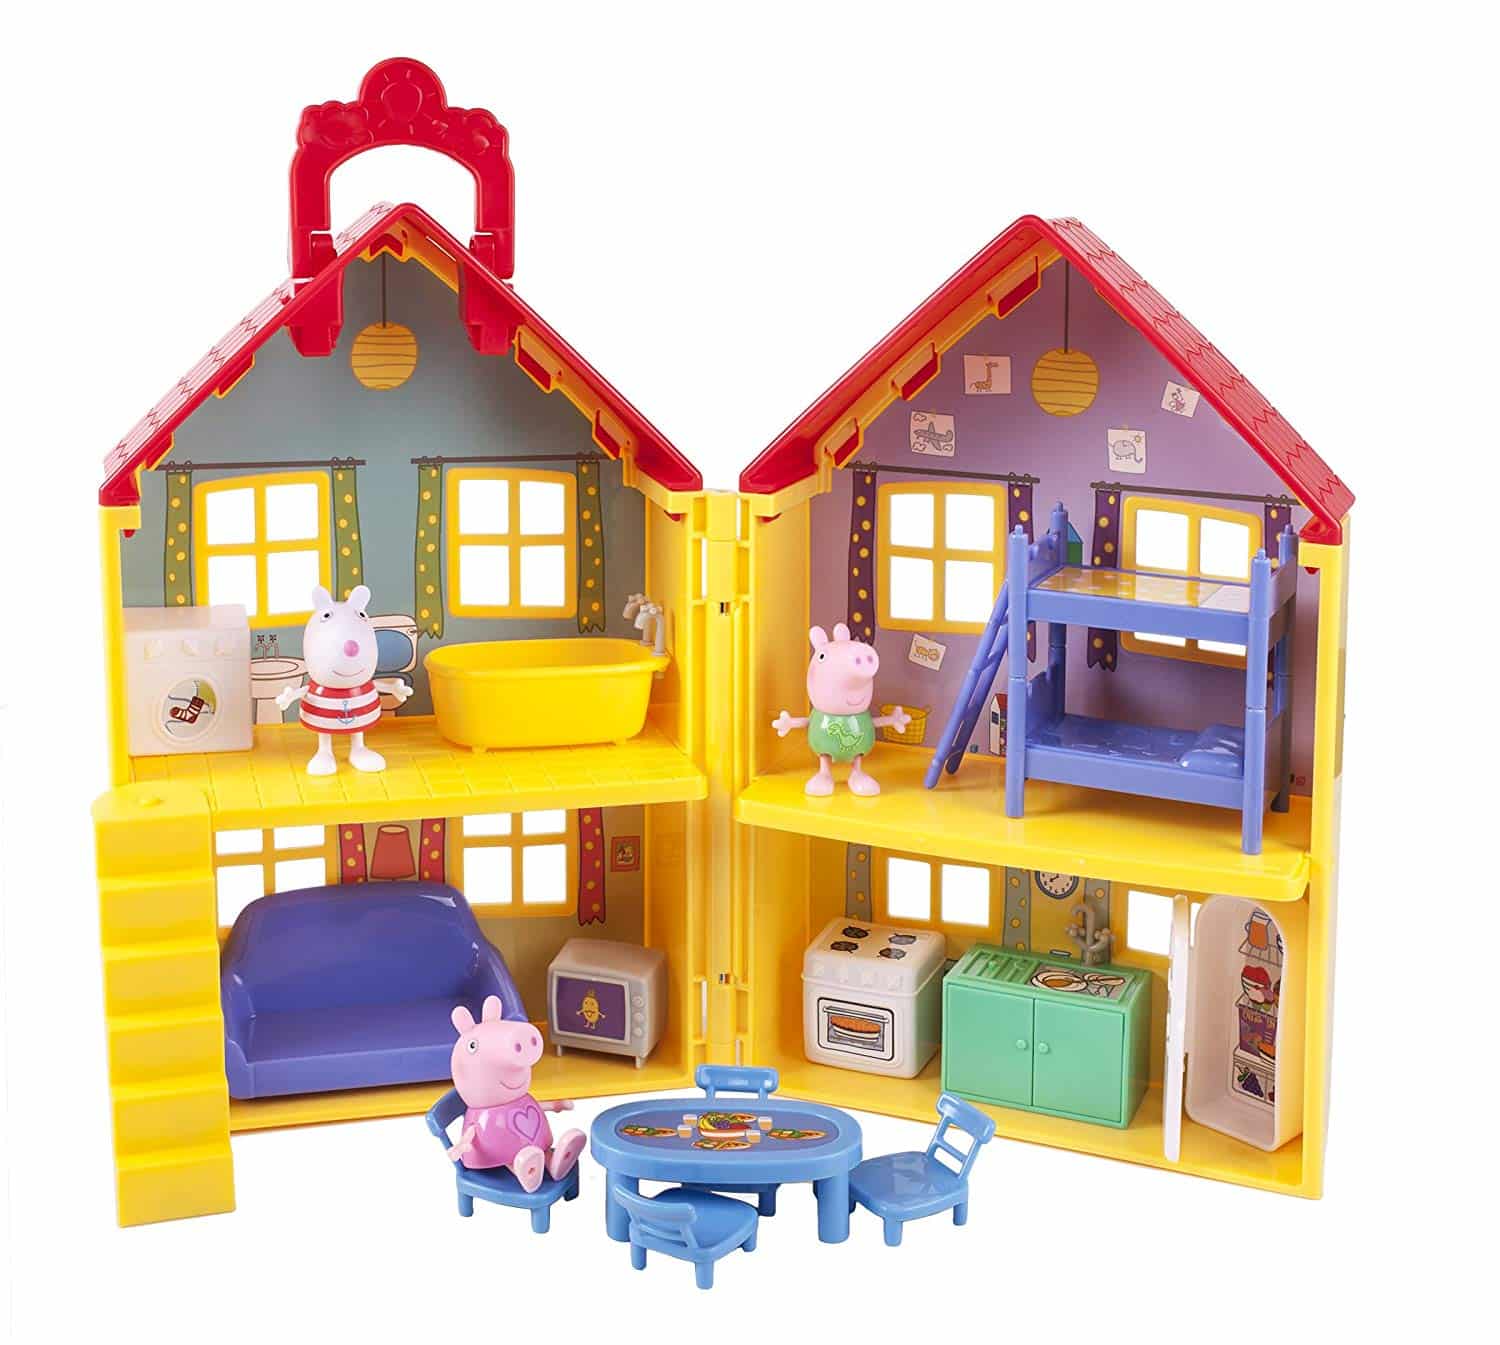 New Peppa Pig Toys & Gifts 2022: Fold Up Toy House 2022